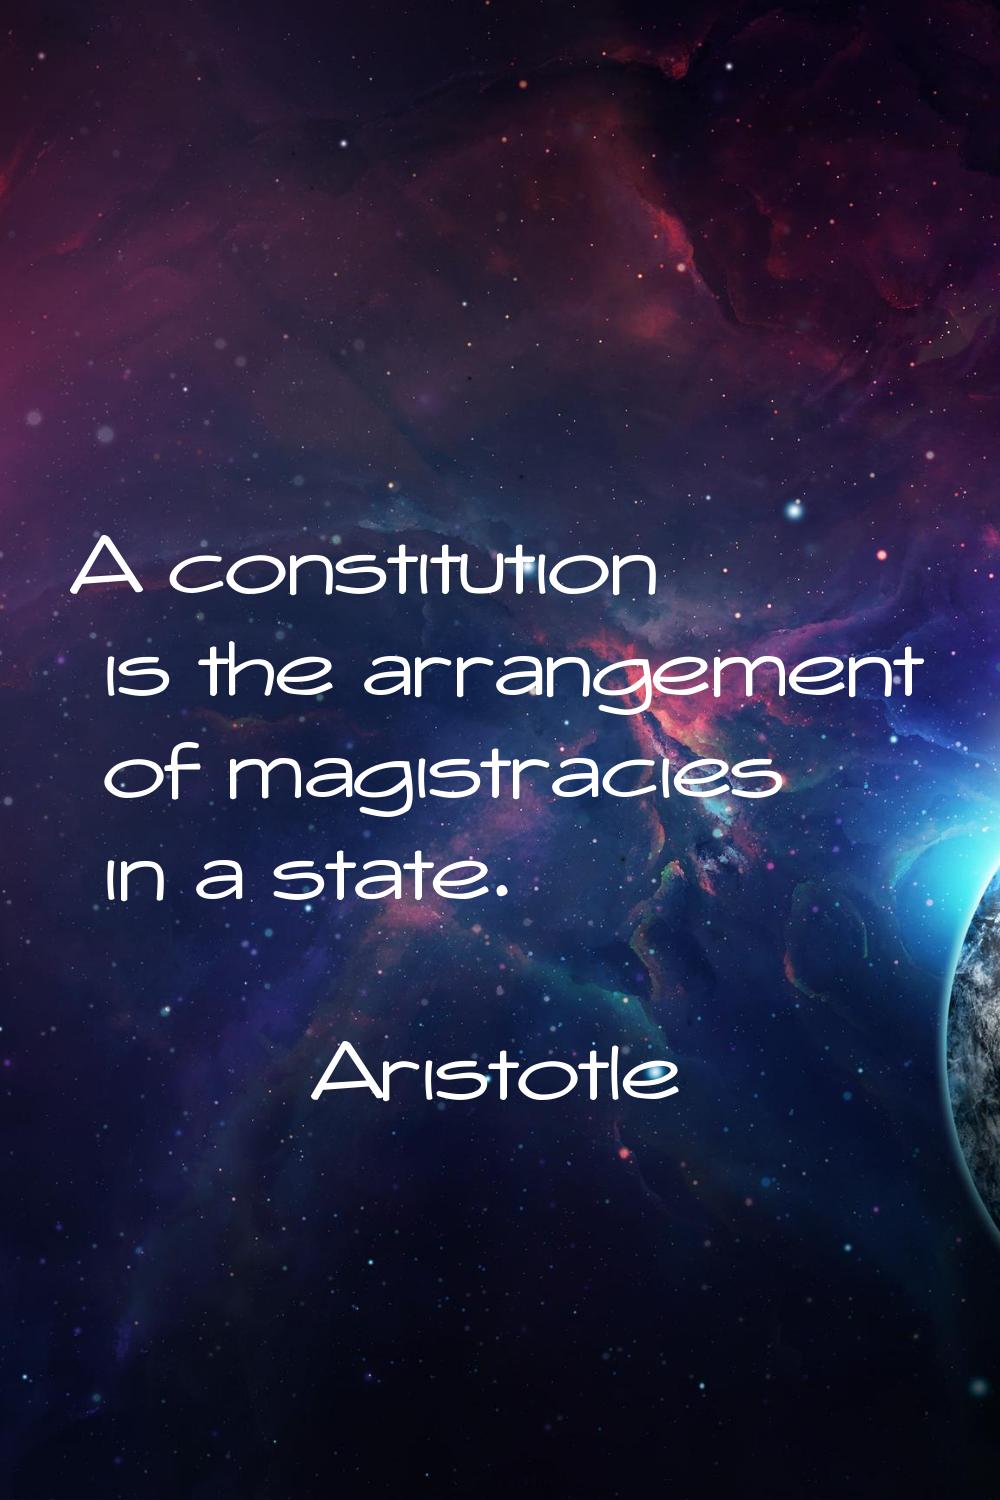 A constitution is the arrangement of magistracies in a state.